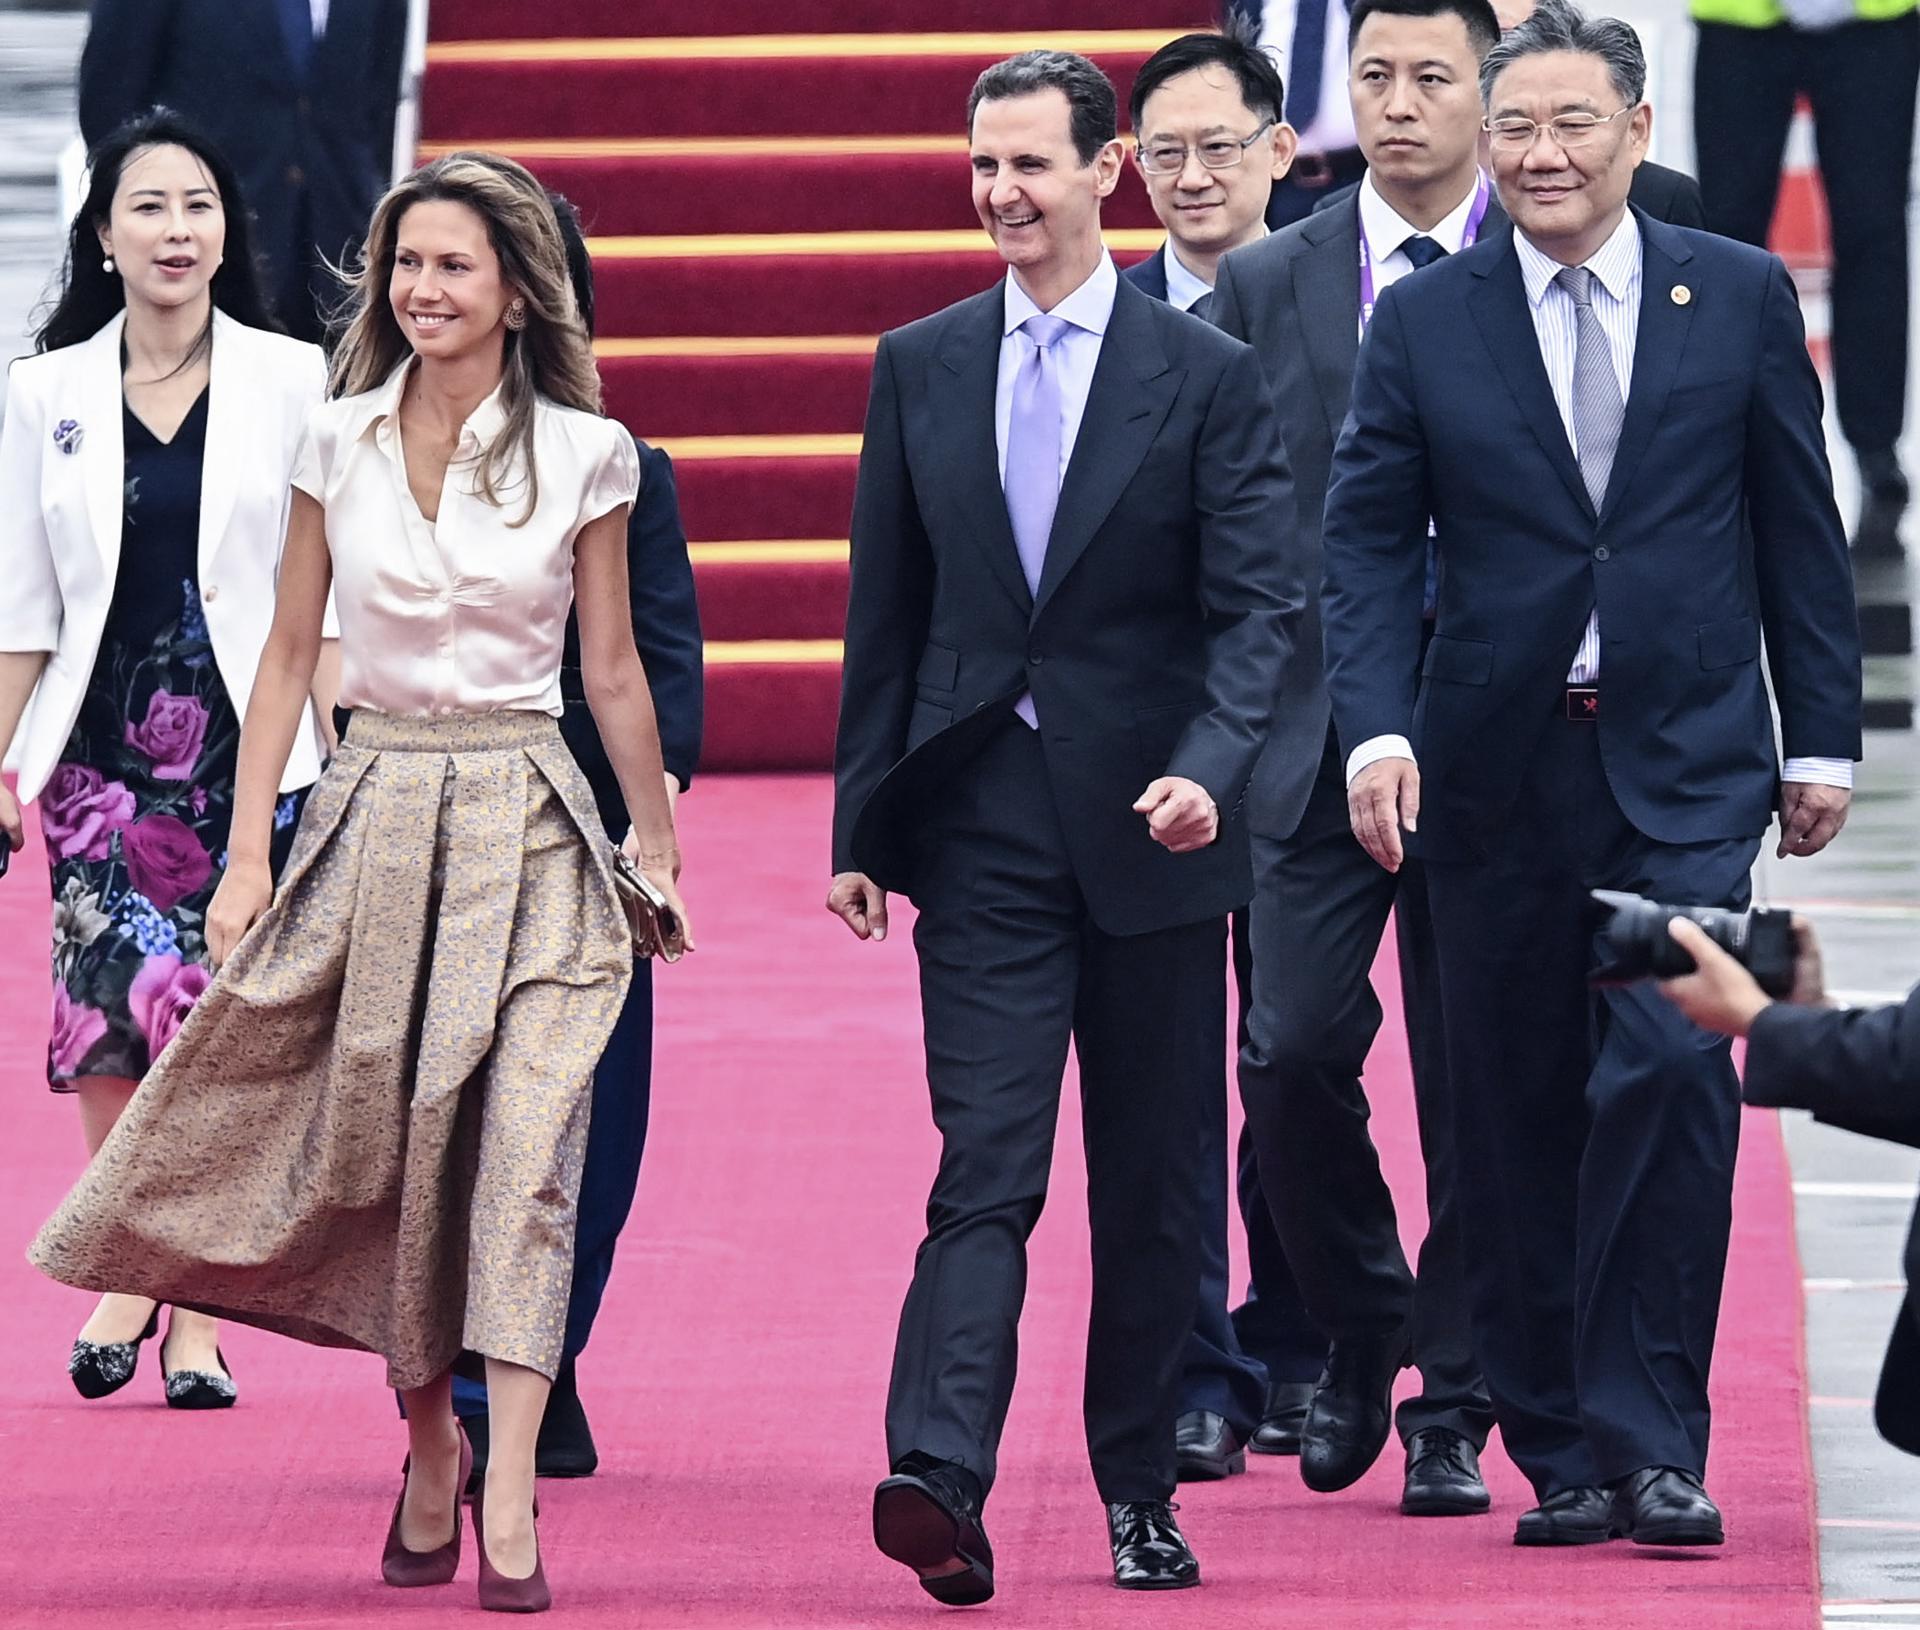 Syrian President Bashar al-Assad (4-R) and his spouse Asma al-Assad (2-L) arrive in Hangzhou, China, 21 September 2023. Al-Assad arrived on 21 Sepotember in China to attend the opening ceremony of the 19th Asian Games. (Siria) EFE/EPA/XINHUA / Xu Yu CHINA OUT / UK AND IRELAND OUT / MANDATORY CREDIT EDITORIAL USE ONLY
